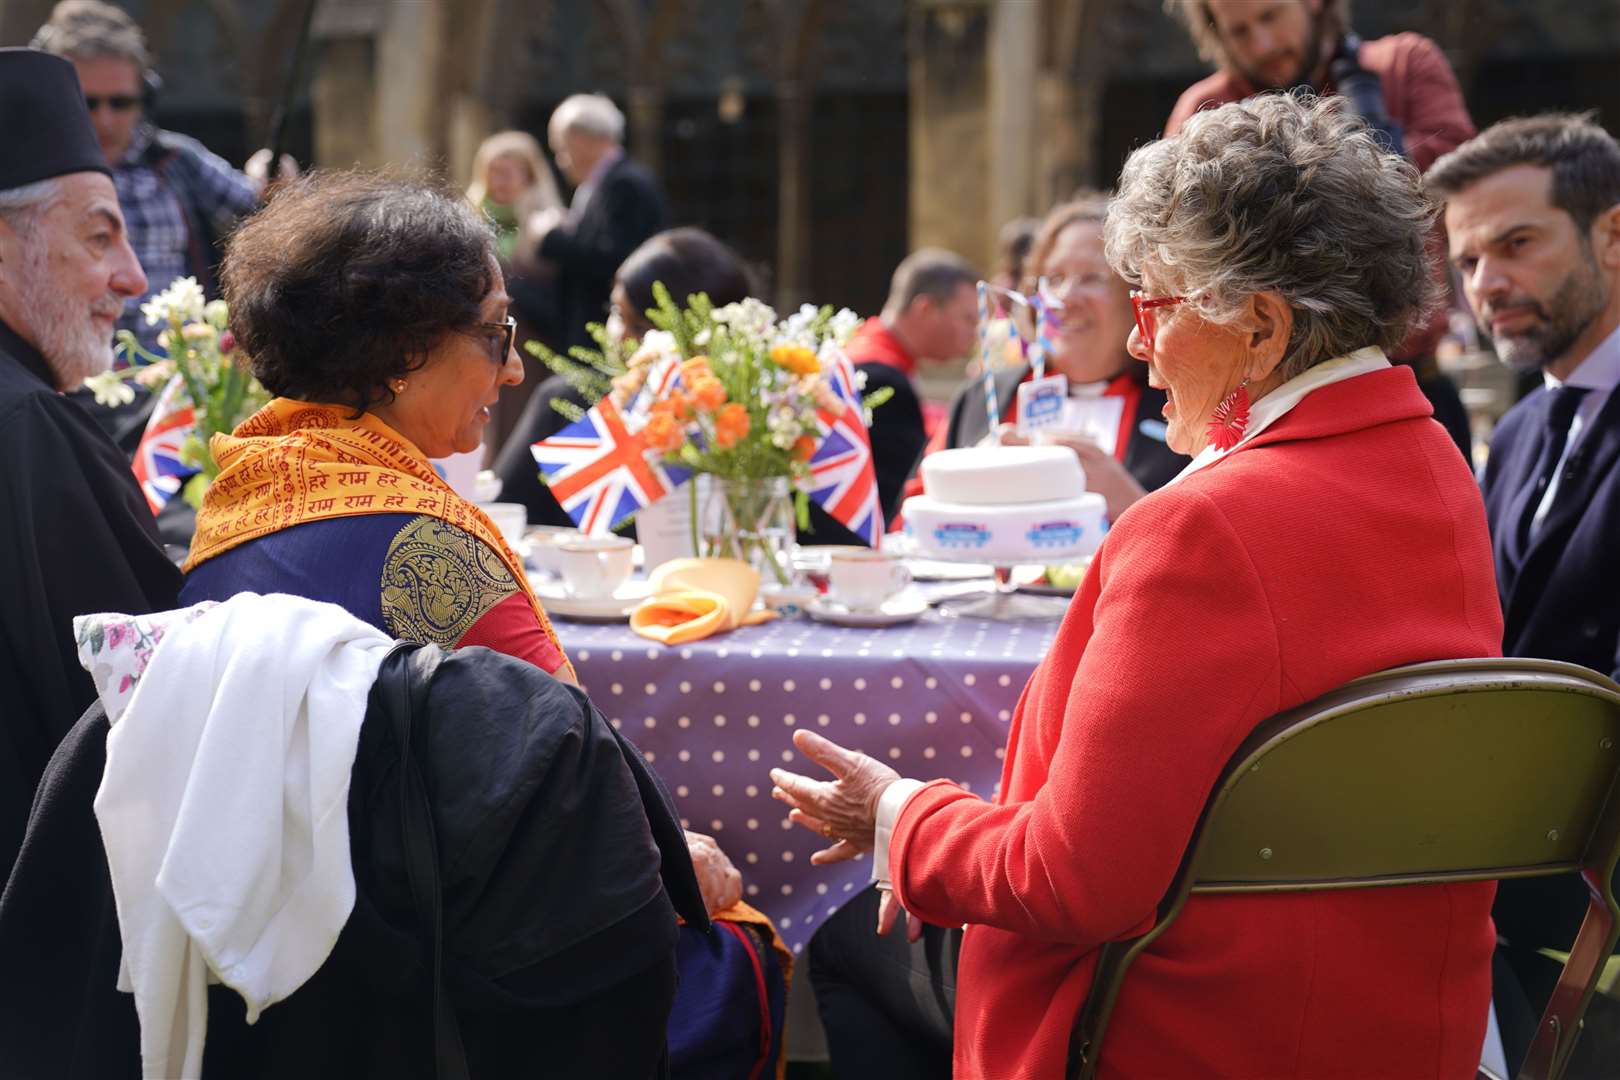 Dame Prue Leith talks to guests at the abbey (James Manning/PA)